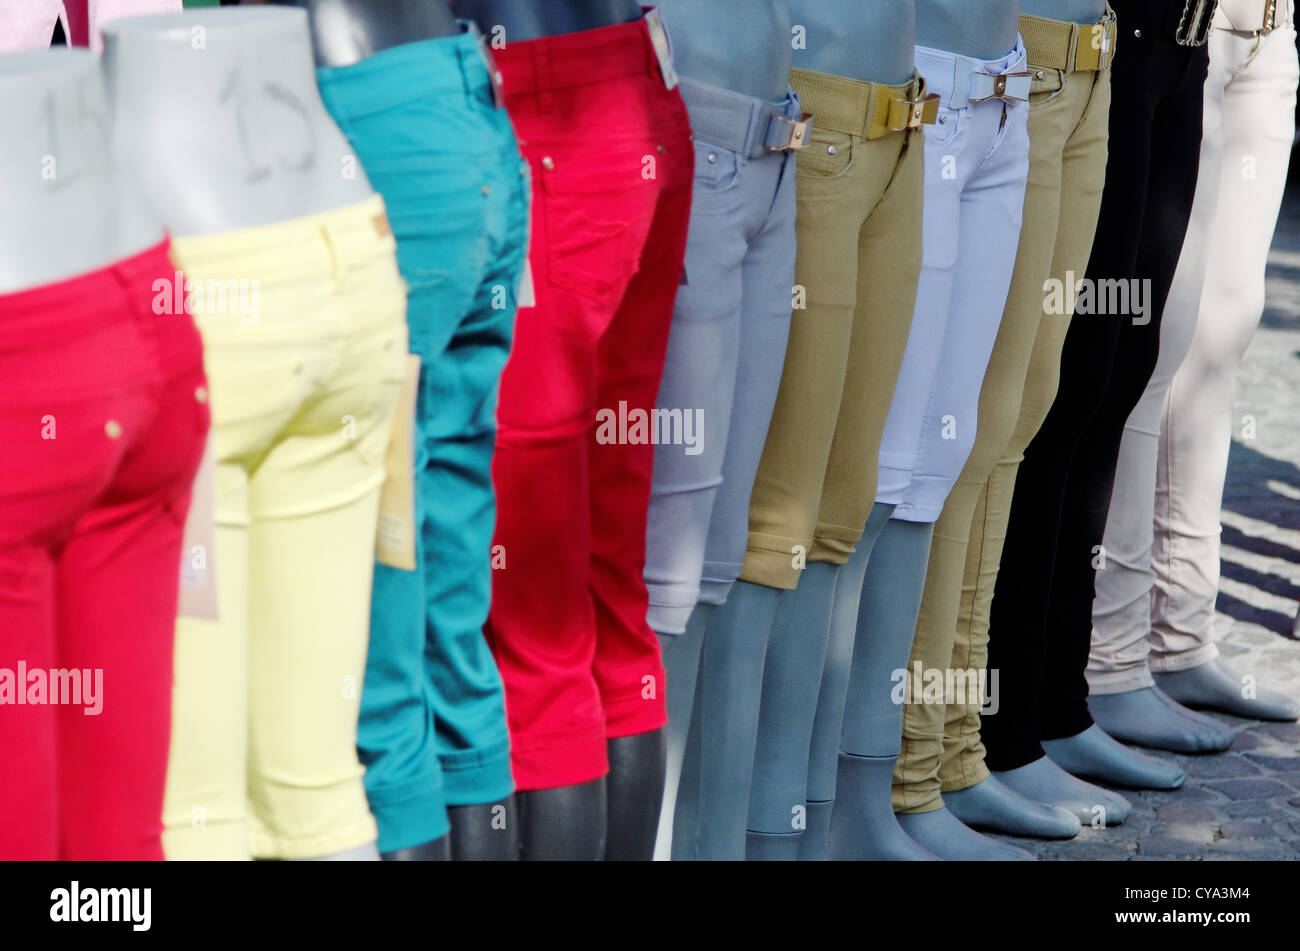 2,019 Three Quarter Pants Images, Stock Photos, 3D objects